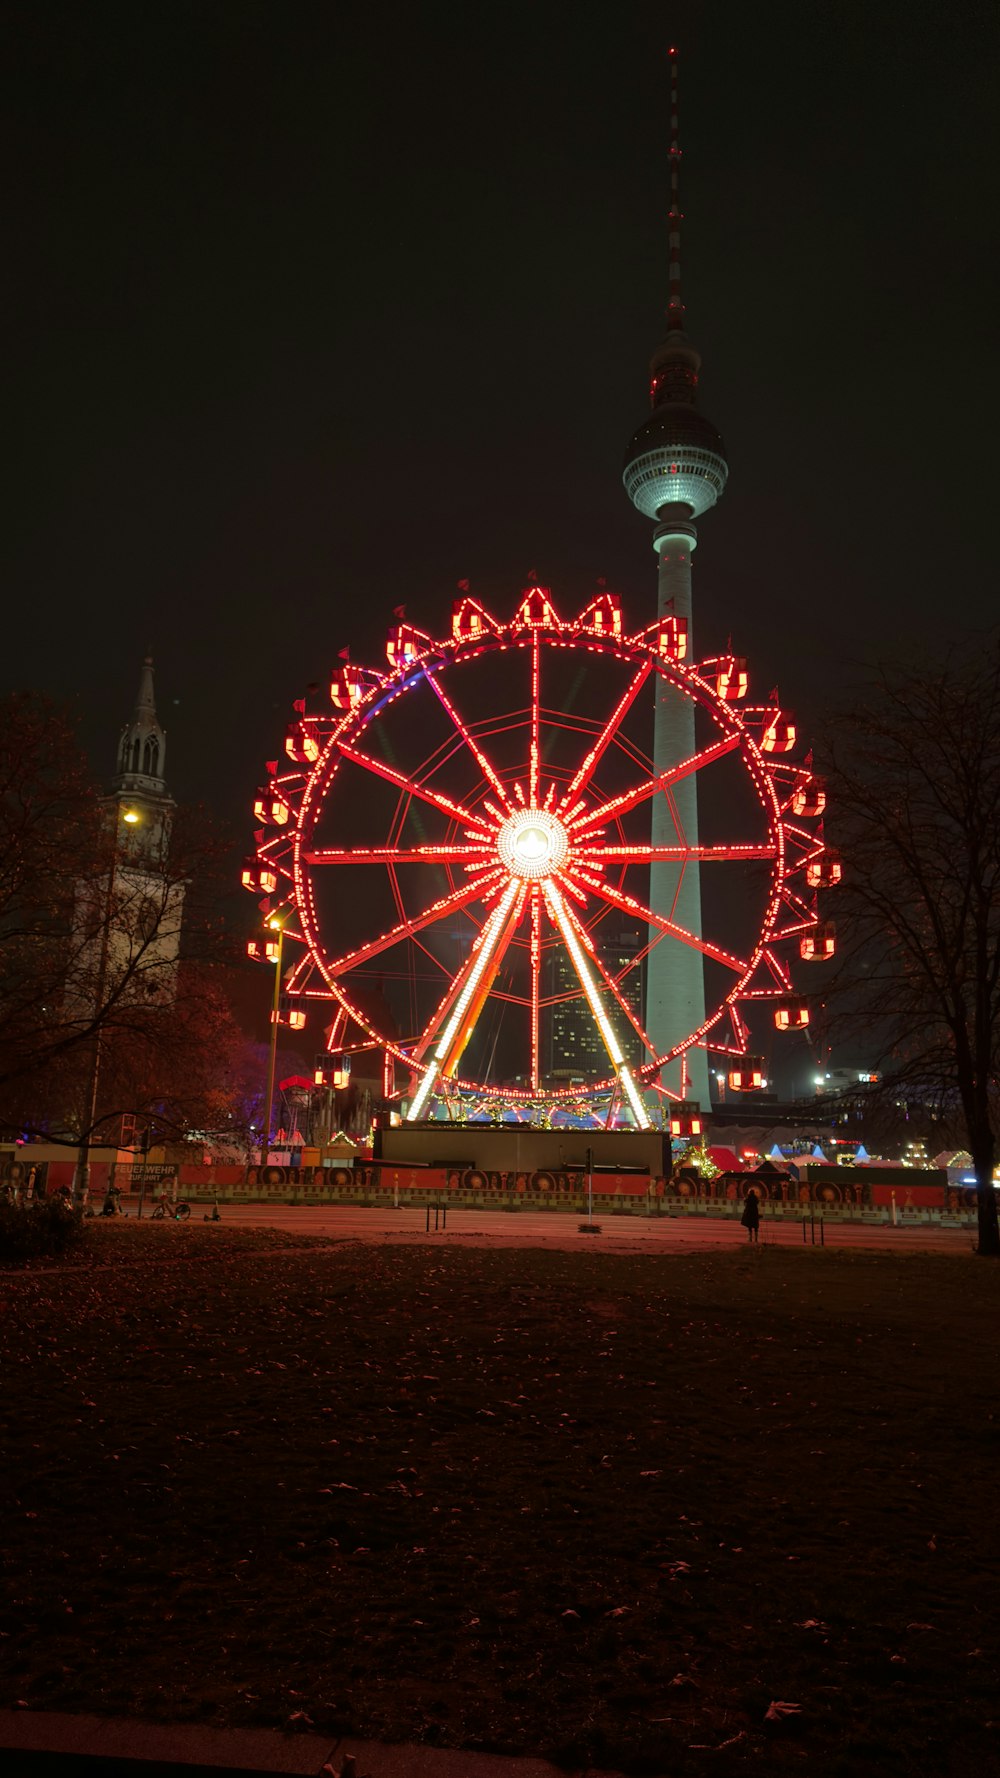 a ferris wheel lit up at night in a park